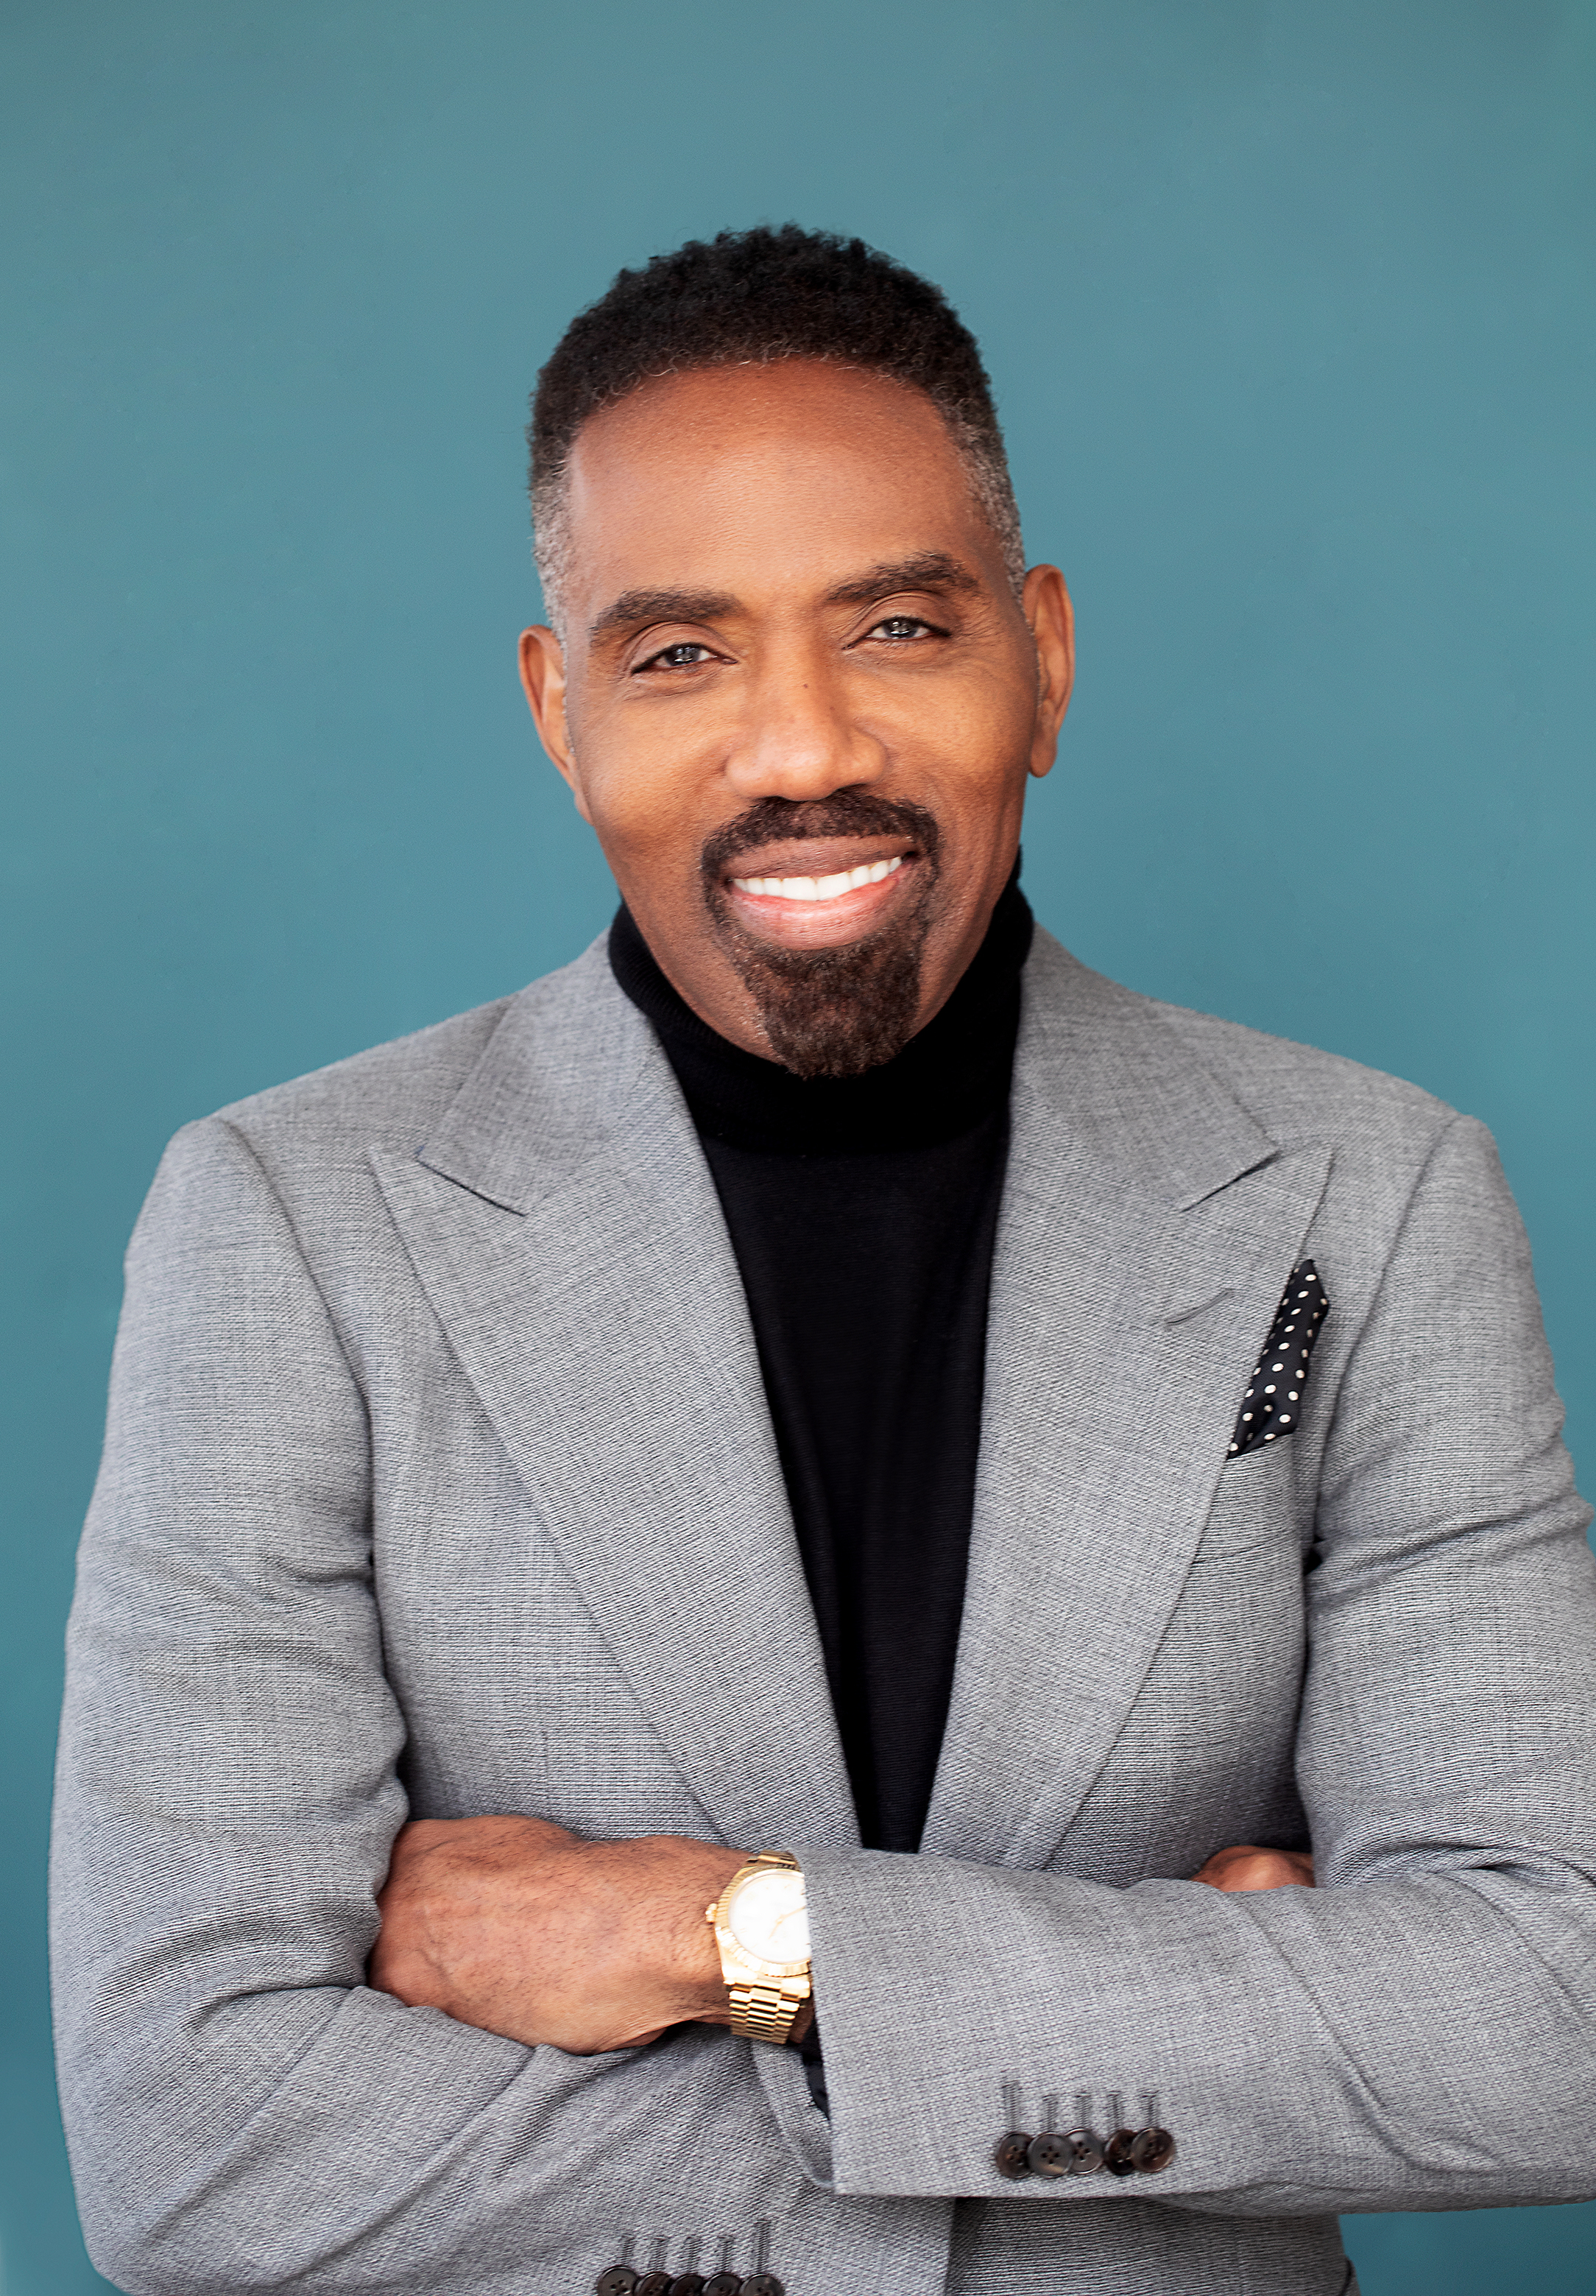 Cover image for  article: Celebrating a Trailblazer: Louis Carr Receives 2023 Silver Medal Award from Chicago Advertising Federation